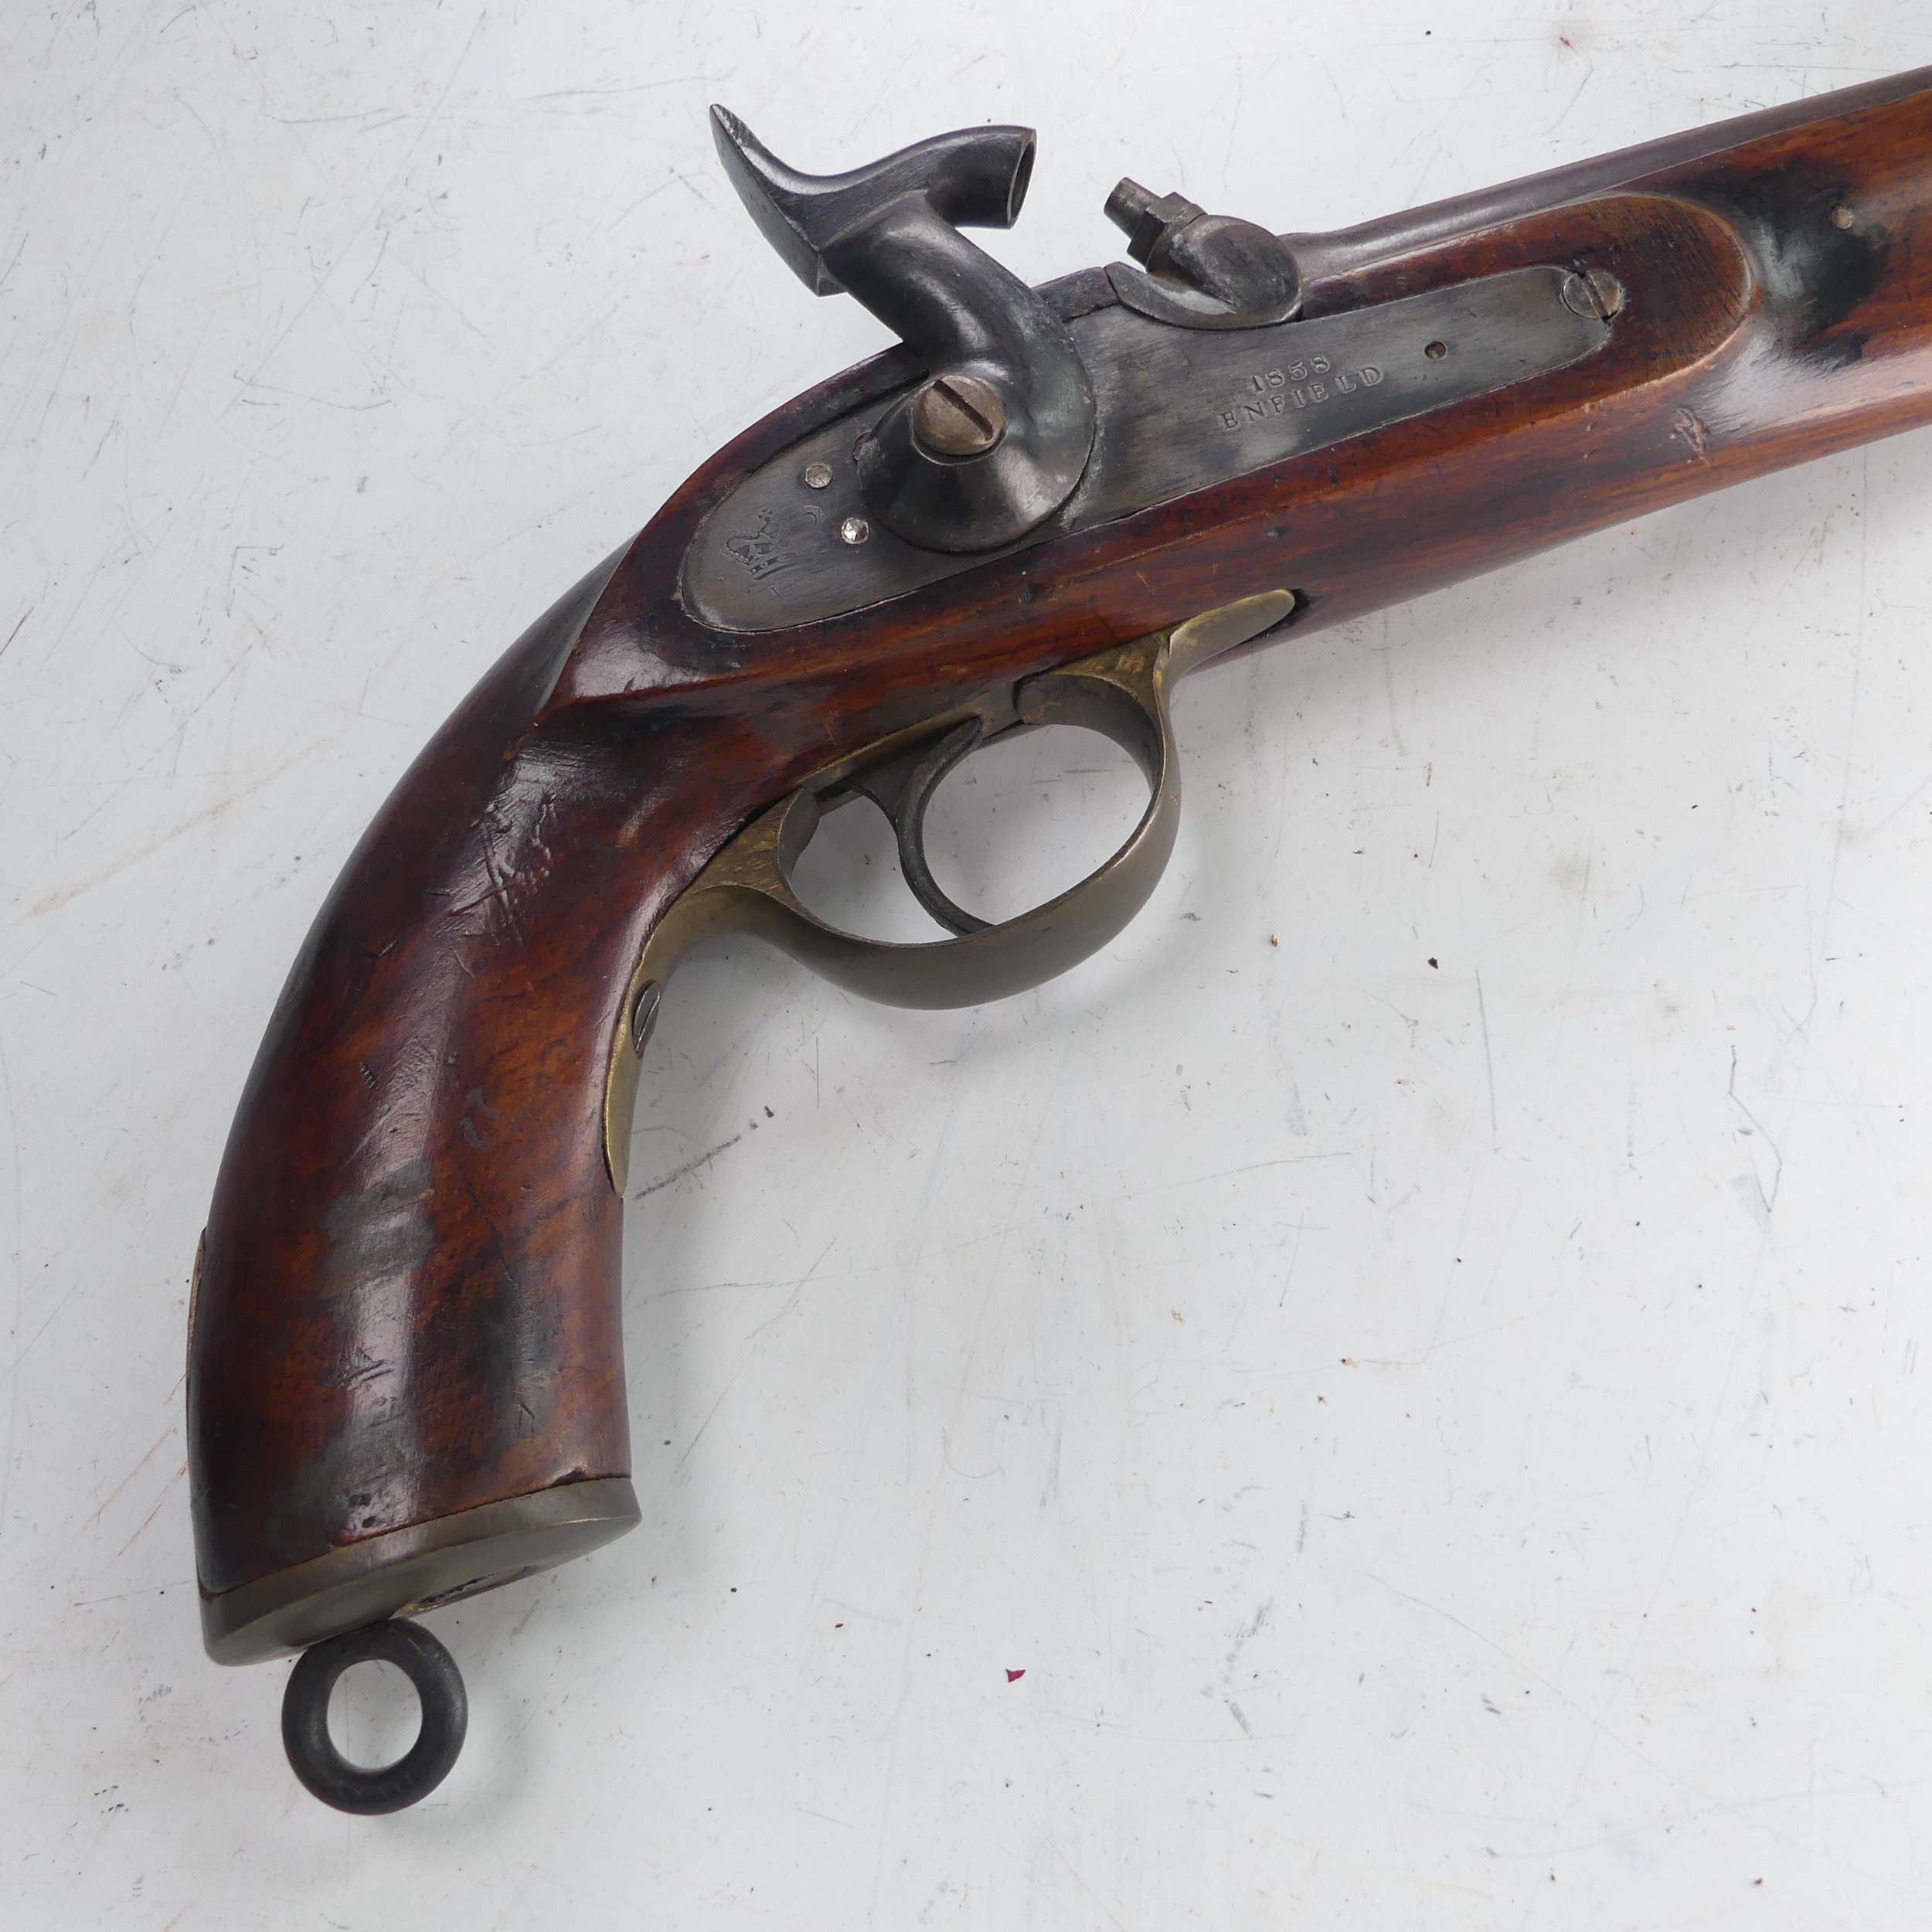 A 19th century 'Enfield' percussion cap service Pistol, with walnut stock, 8 inch steel barrel, - Image 2 of 5